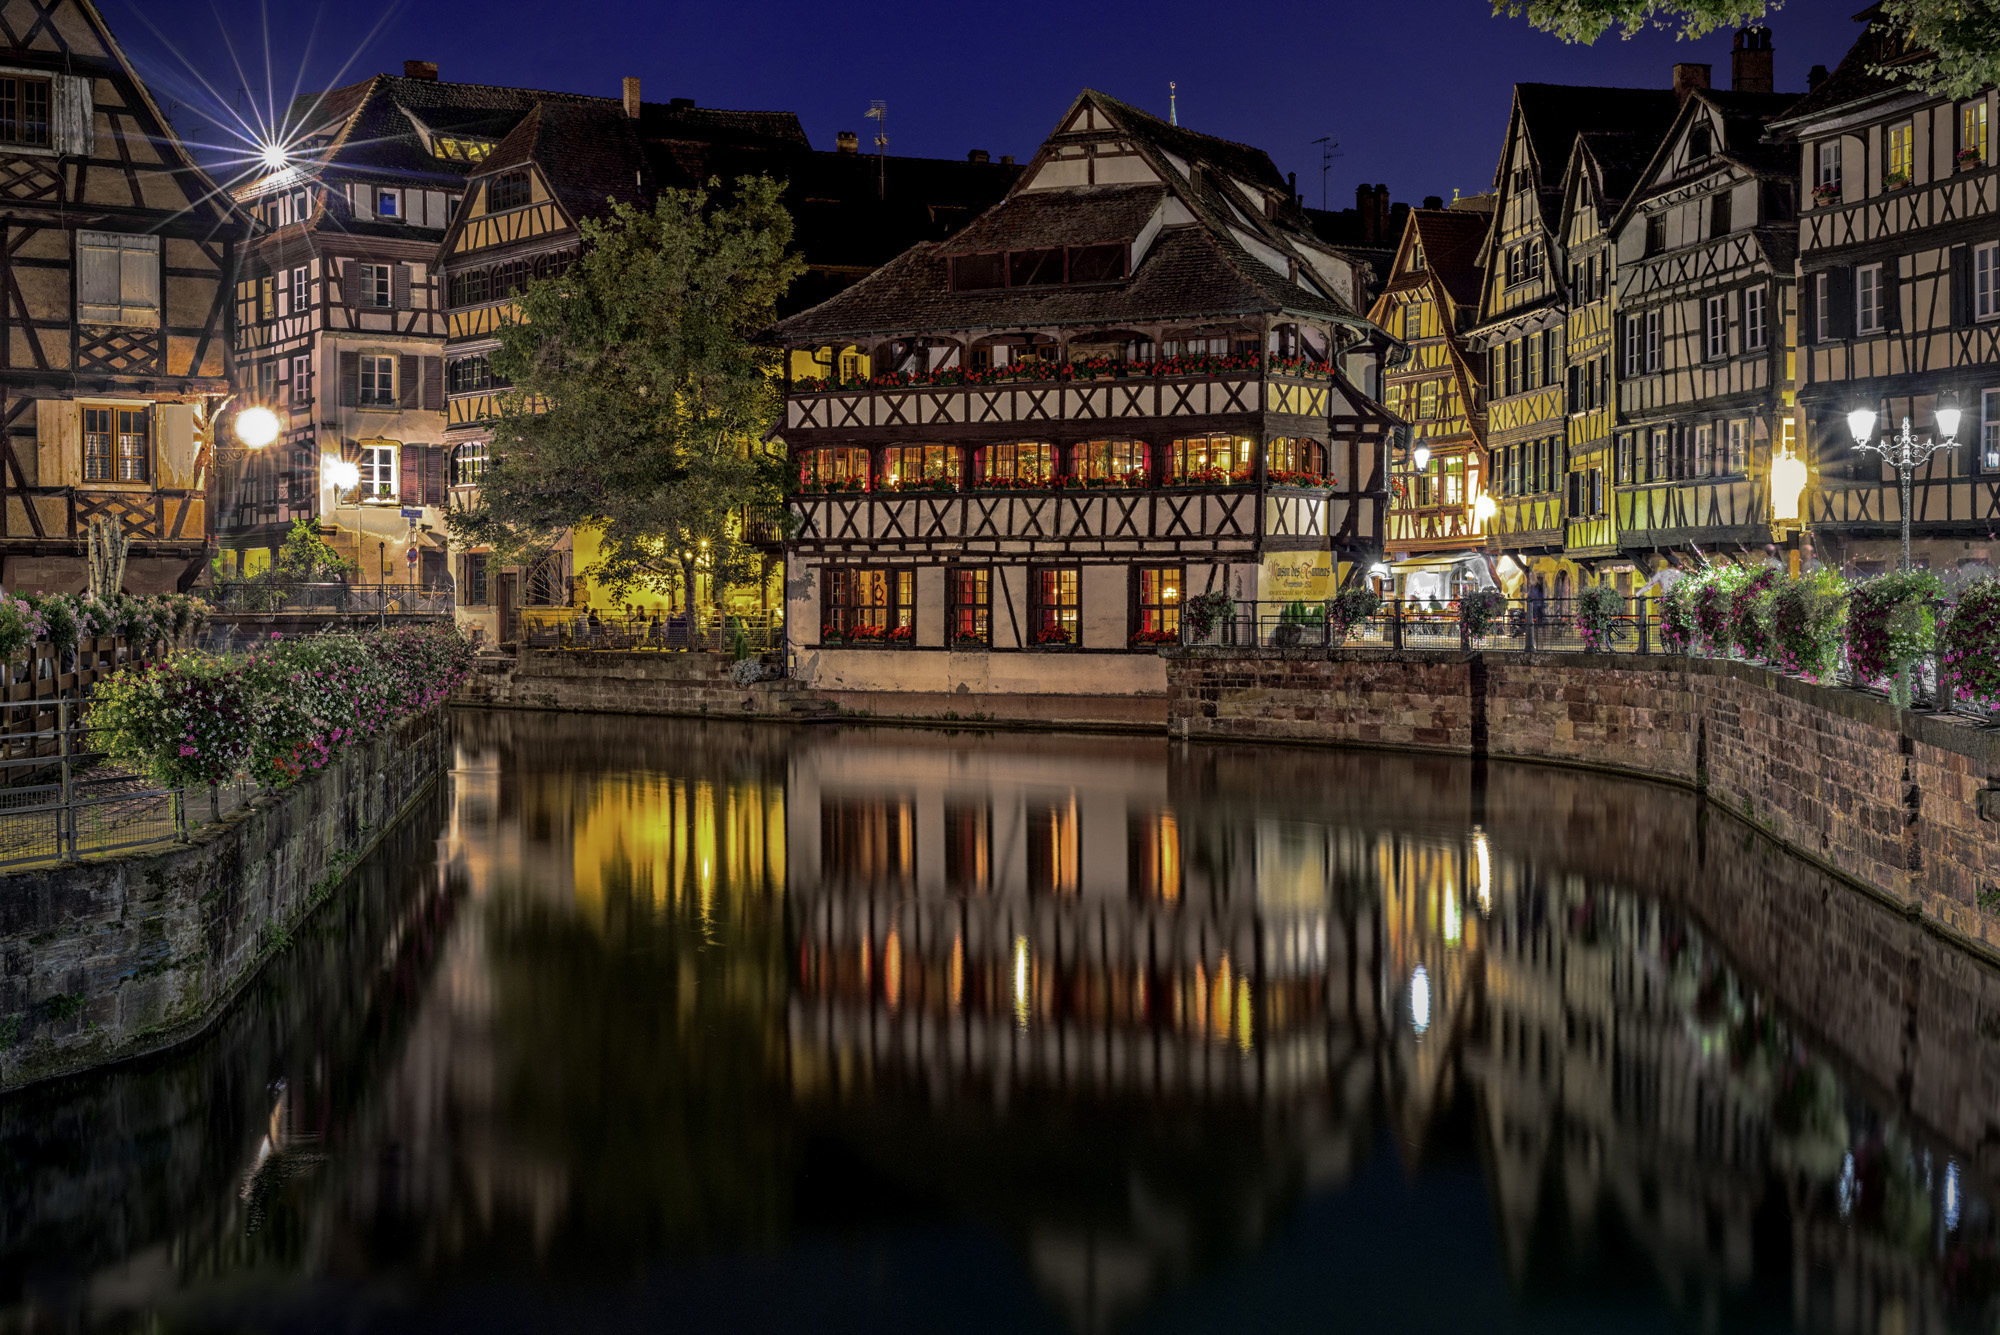 man made, strasbourg, building, canal, city, france, night, reflection, cities